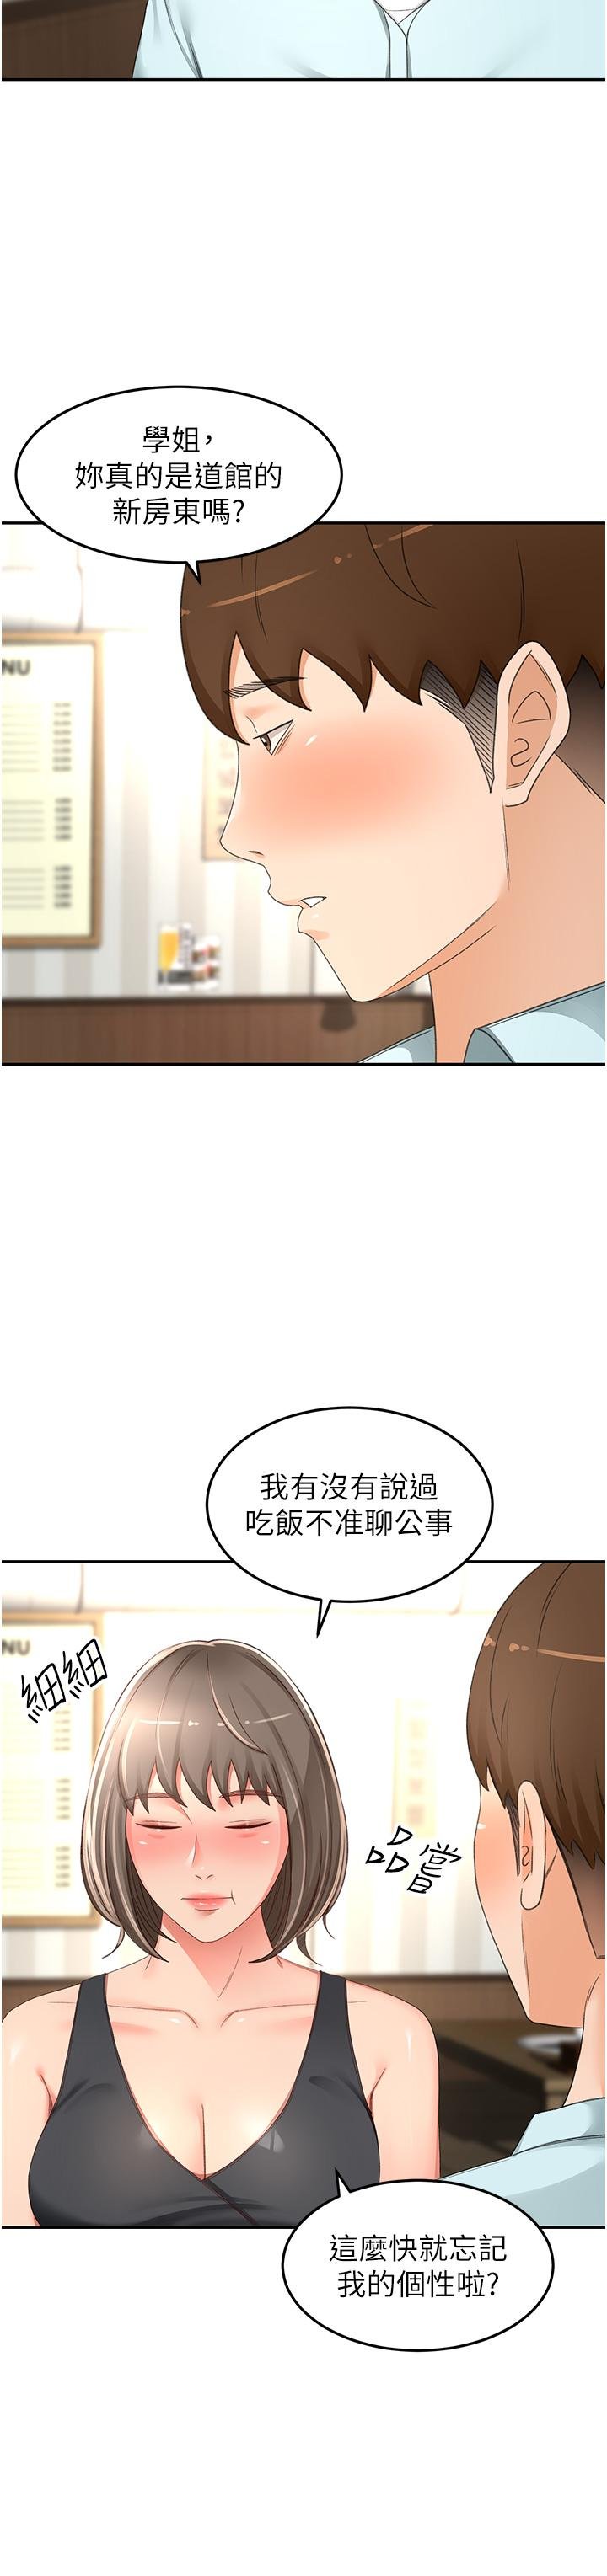 the-little-master-raw-chap-87-2